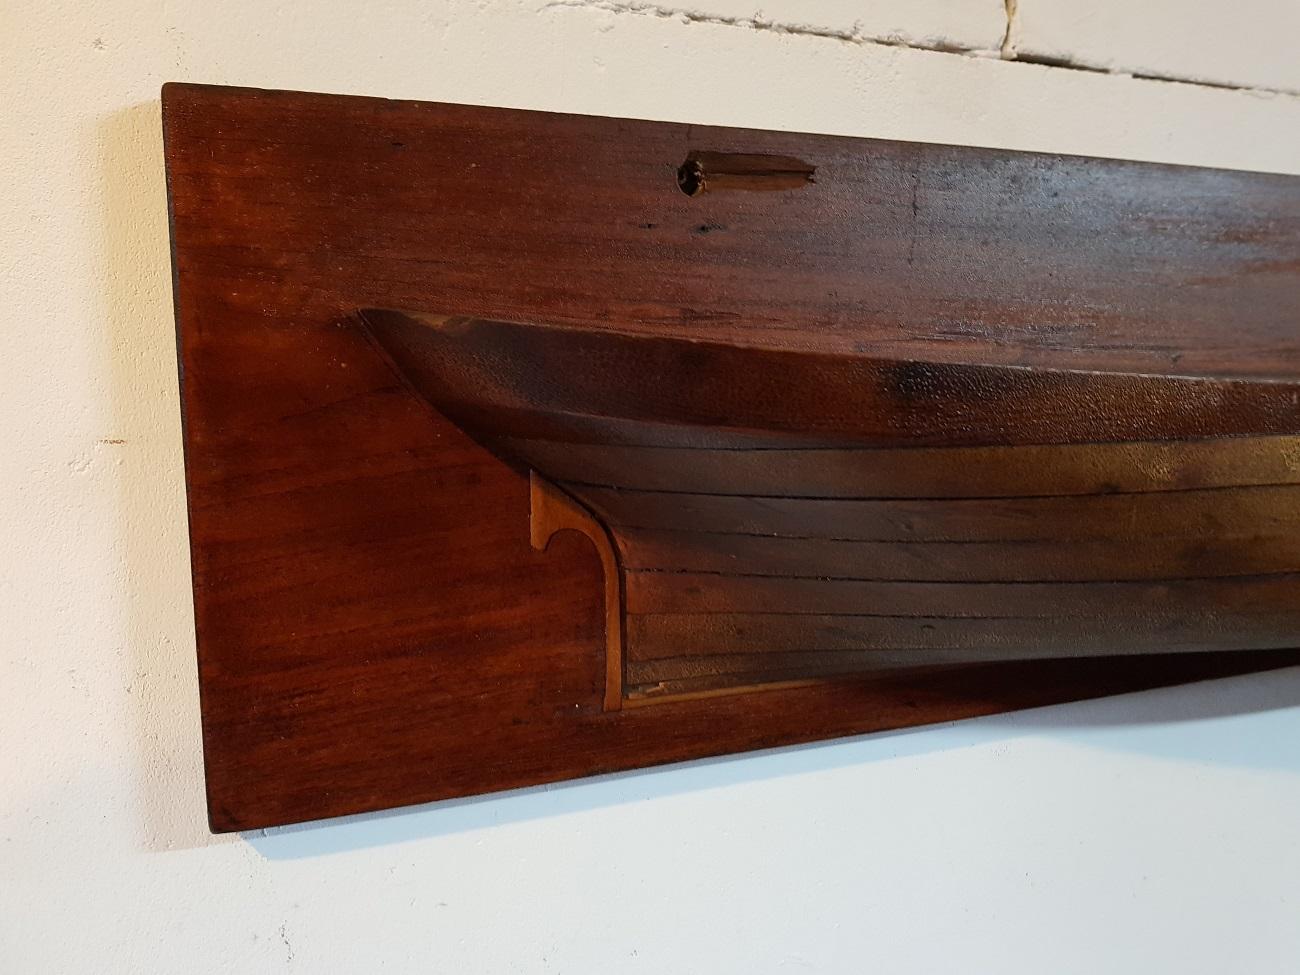 Beautiful handmade wooden model of a Half Hull after a Dutch Ship named 